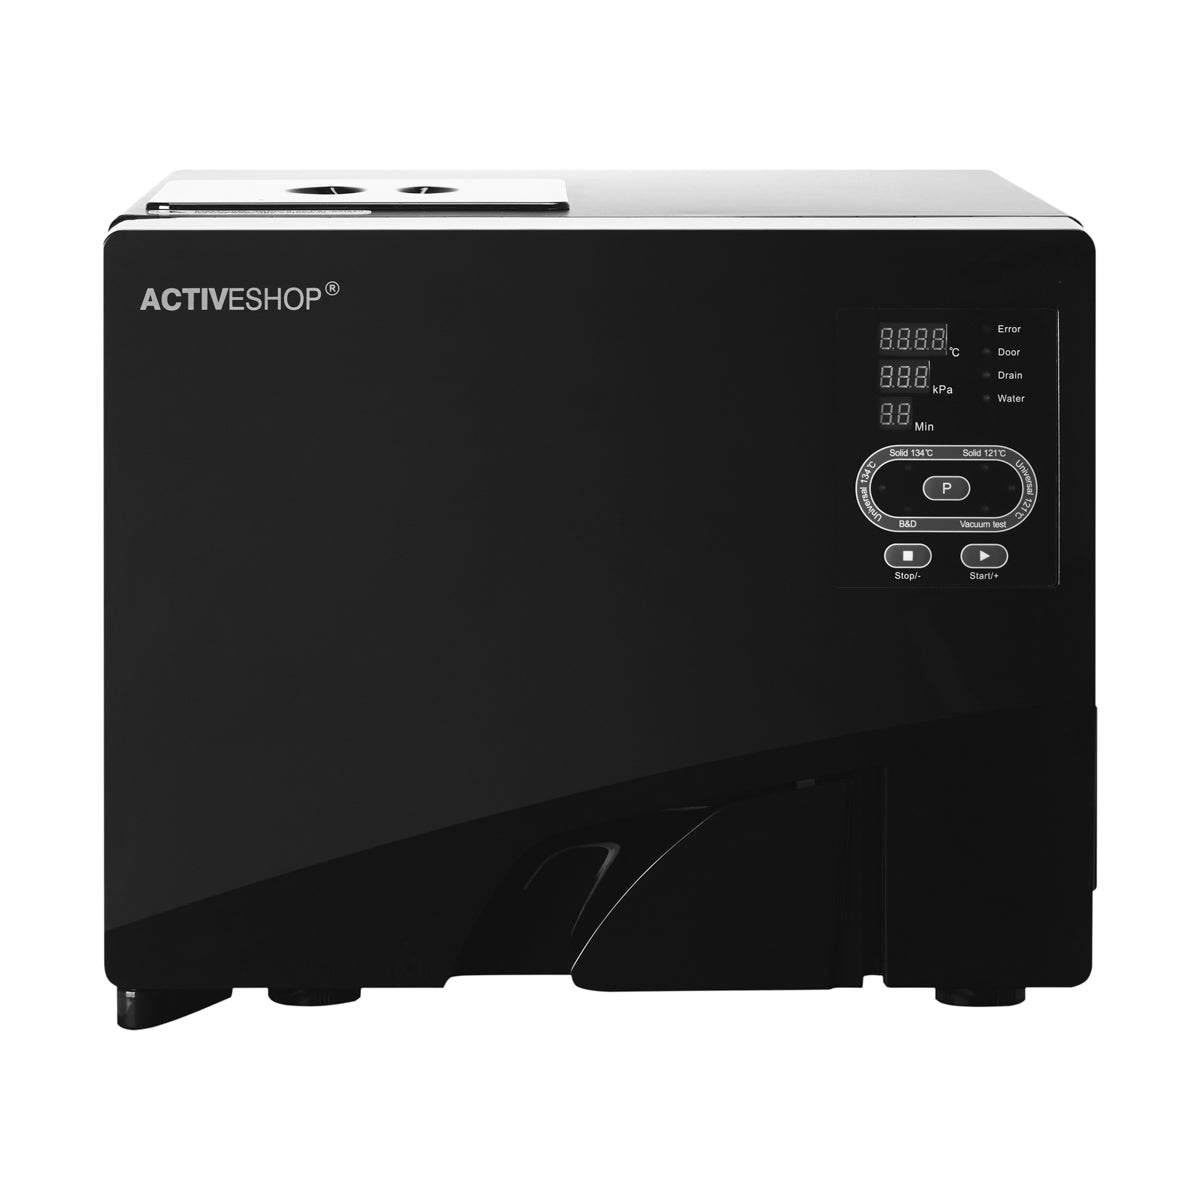 LAFOMED AUTOCLAVE STANDARD LINE LFSS08AA LED WITH PRINTER 8 L CL. B MEDICAL BLACK